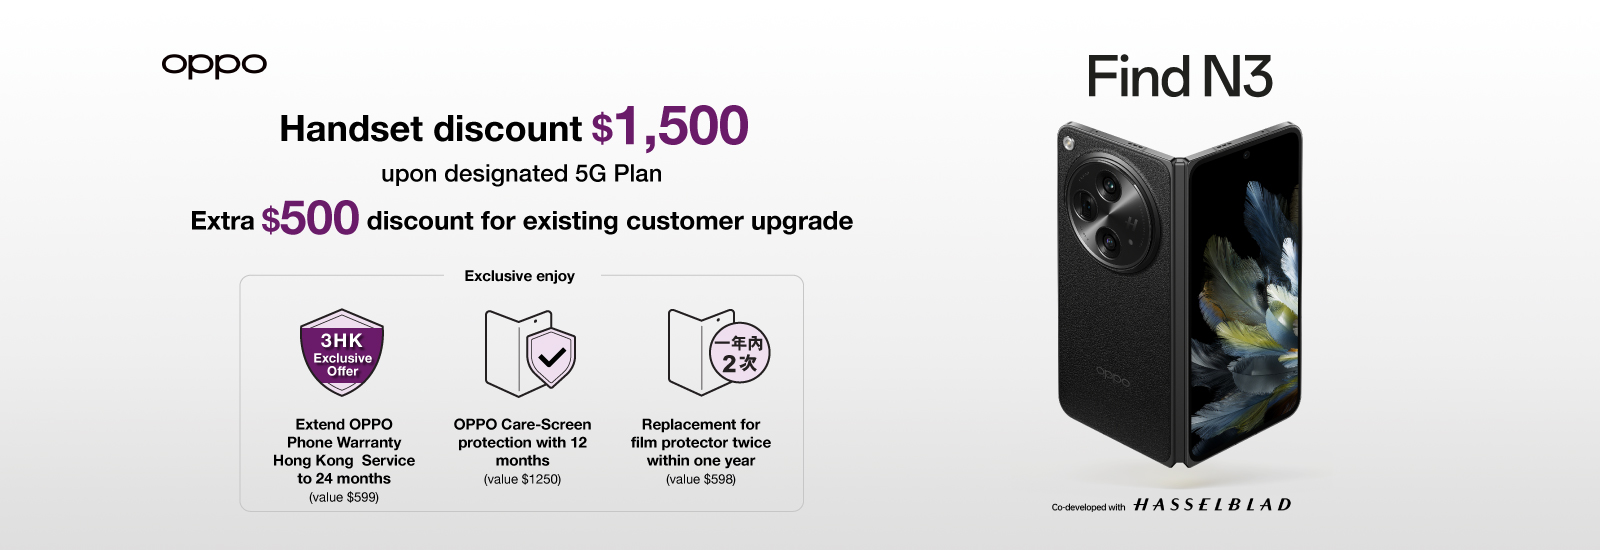 Handset discount $1,500 upon designated 5G Plan. Extra $500 discount for existing customer upgrade